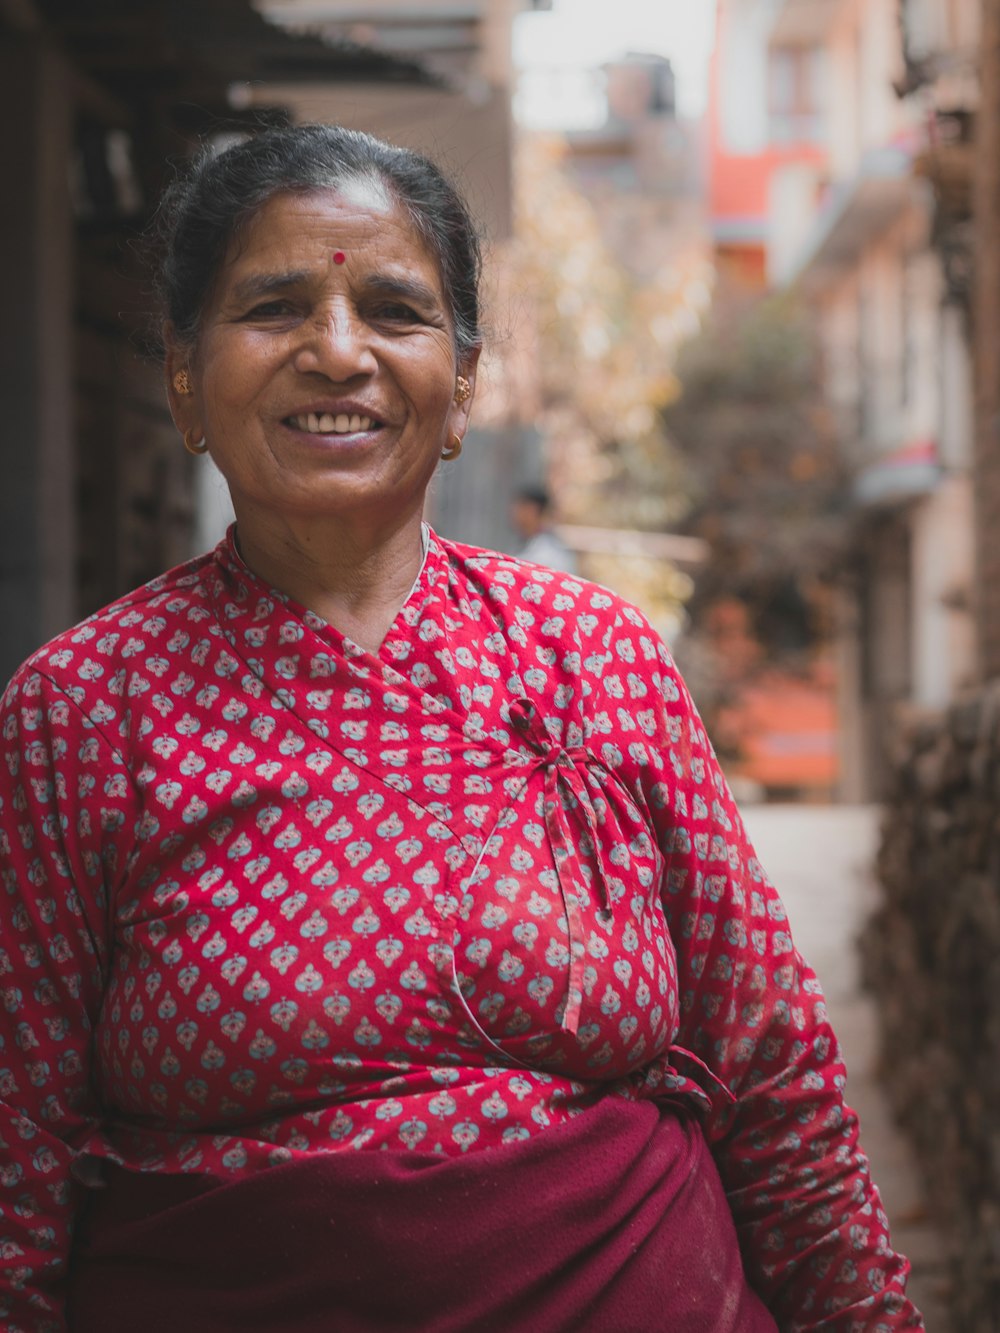 750+ Indian Woman Pictures [HD] | Download Free Images on Unsplash